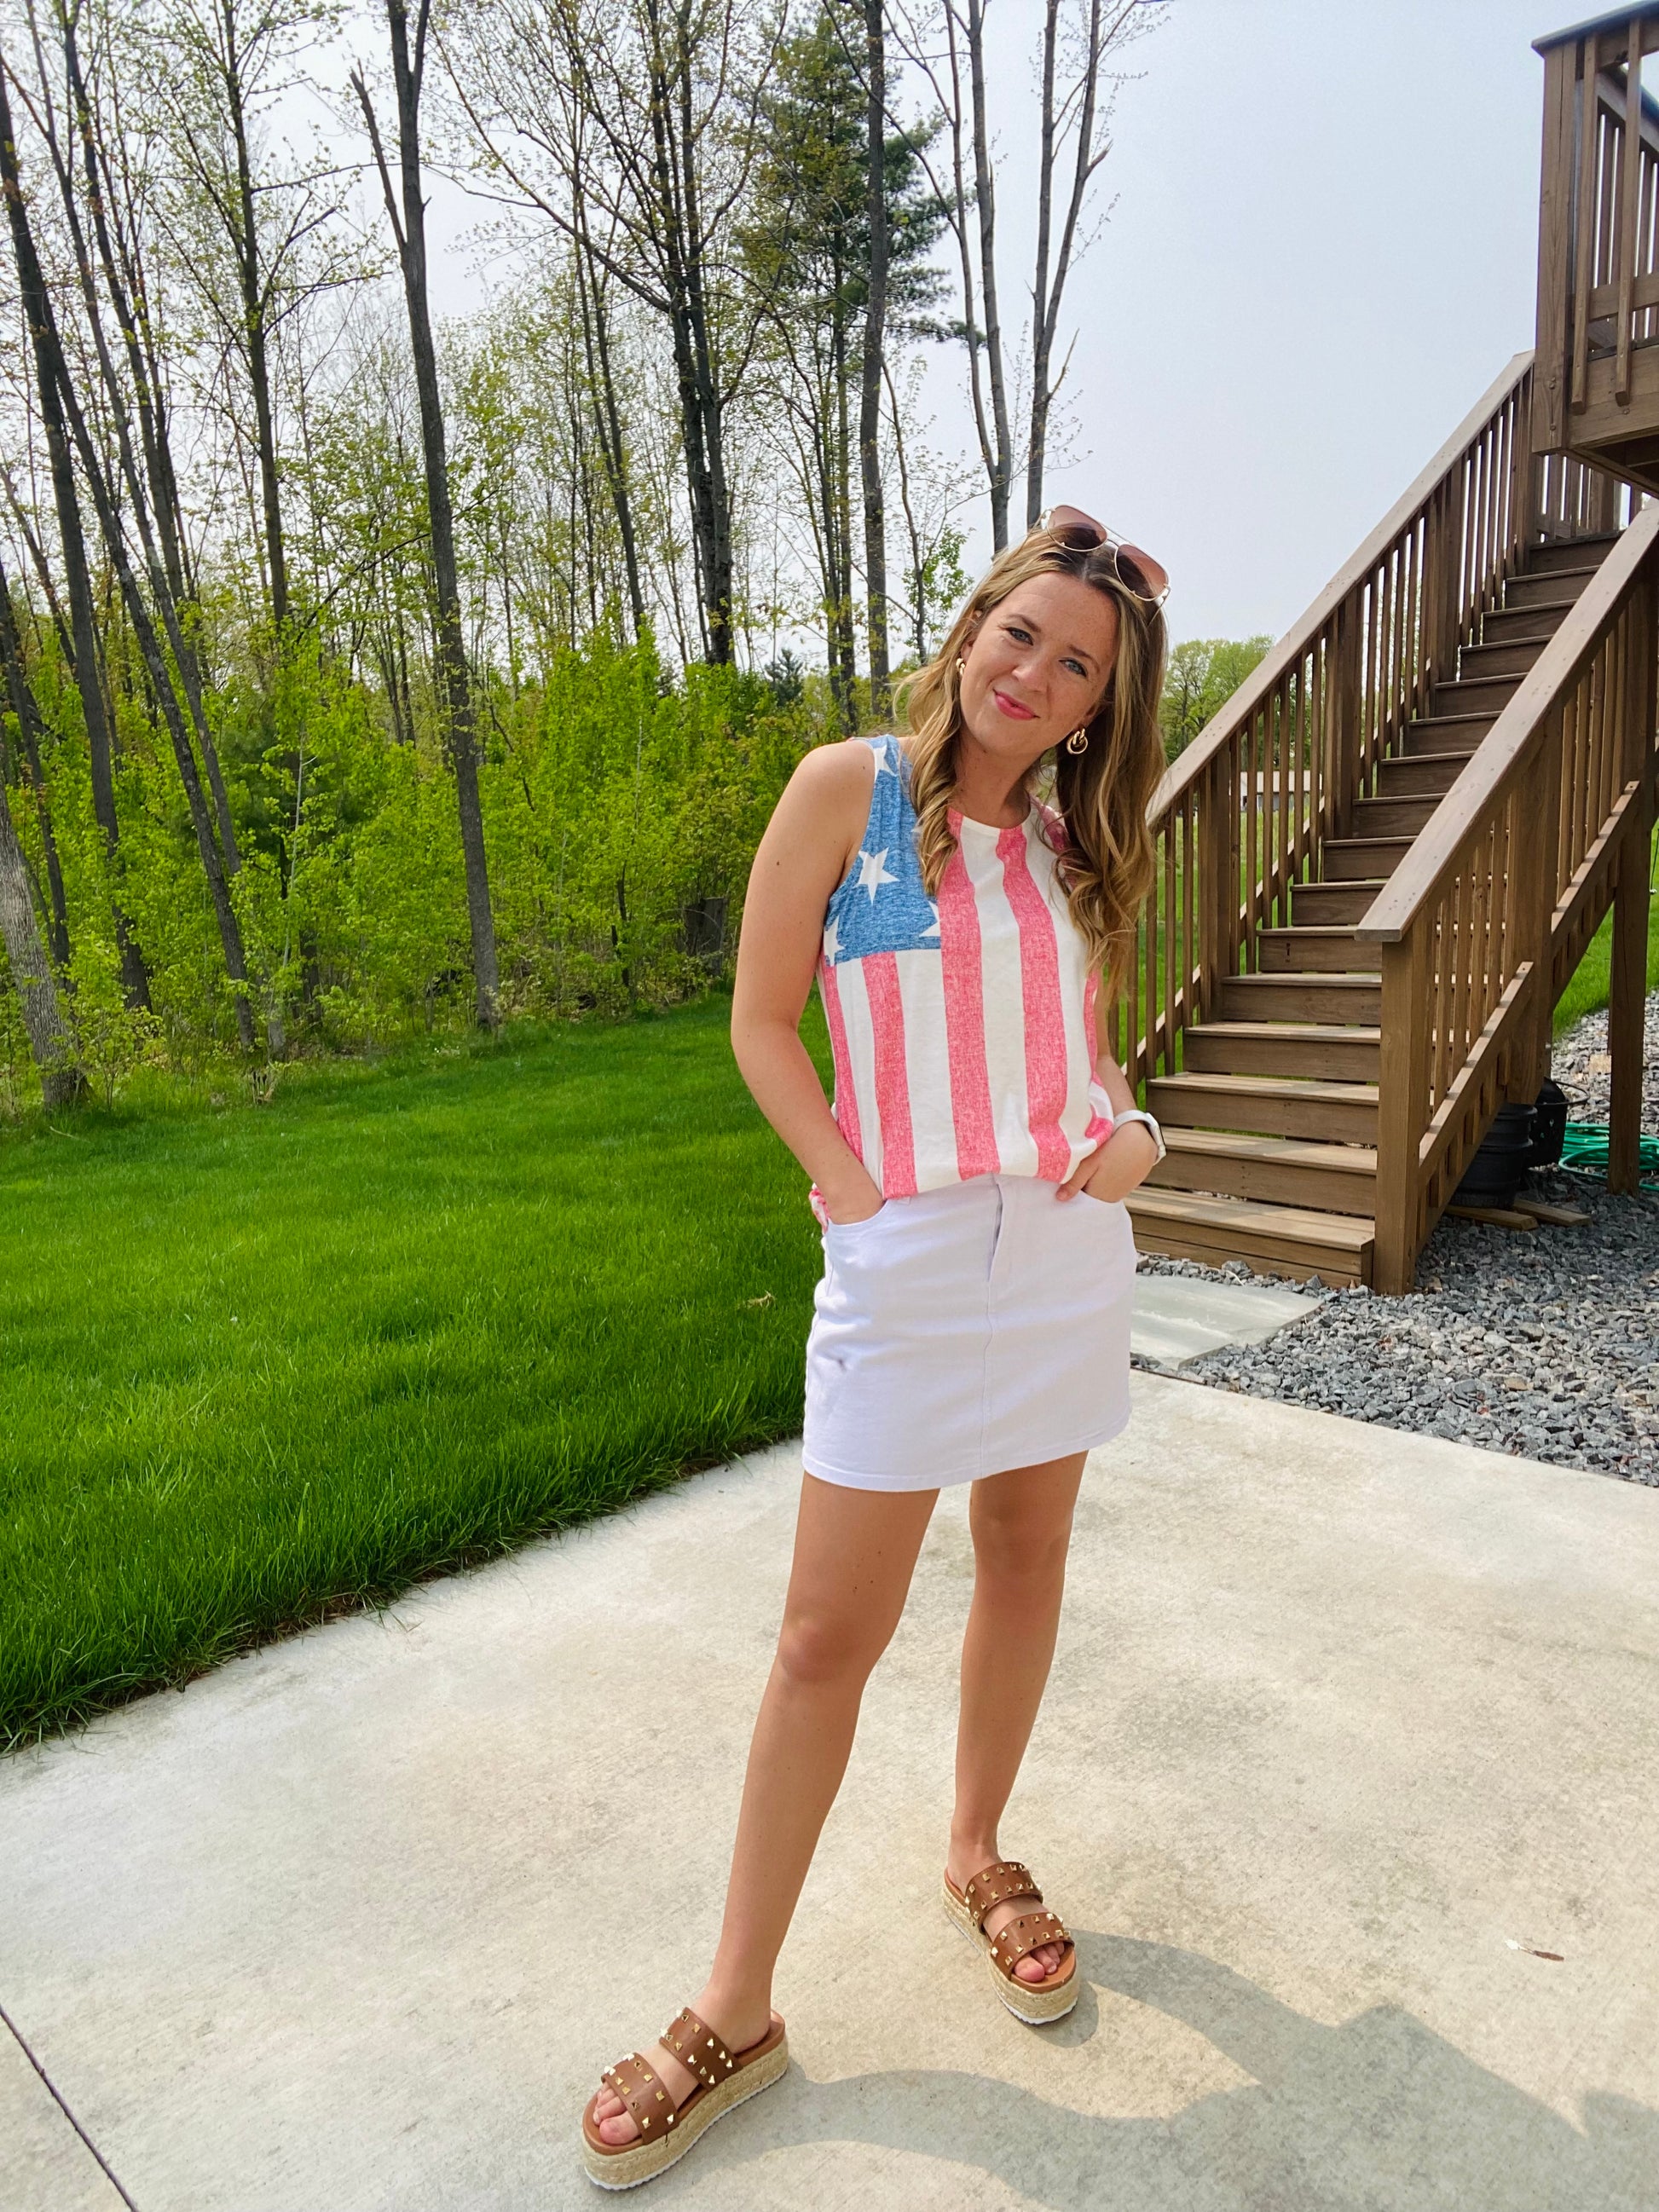 This Miss Americana Flag Tank Top is perfect for your summer patriotic wardrobe. The high neckline, festive American flag design, and patriotic colors make it ideal for 4th of July and Memorial Day celebrations. Wear it dressed up with a denim skirt or down with black athletic shorts for any summer occasion.